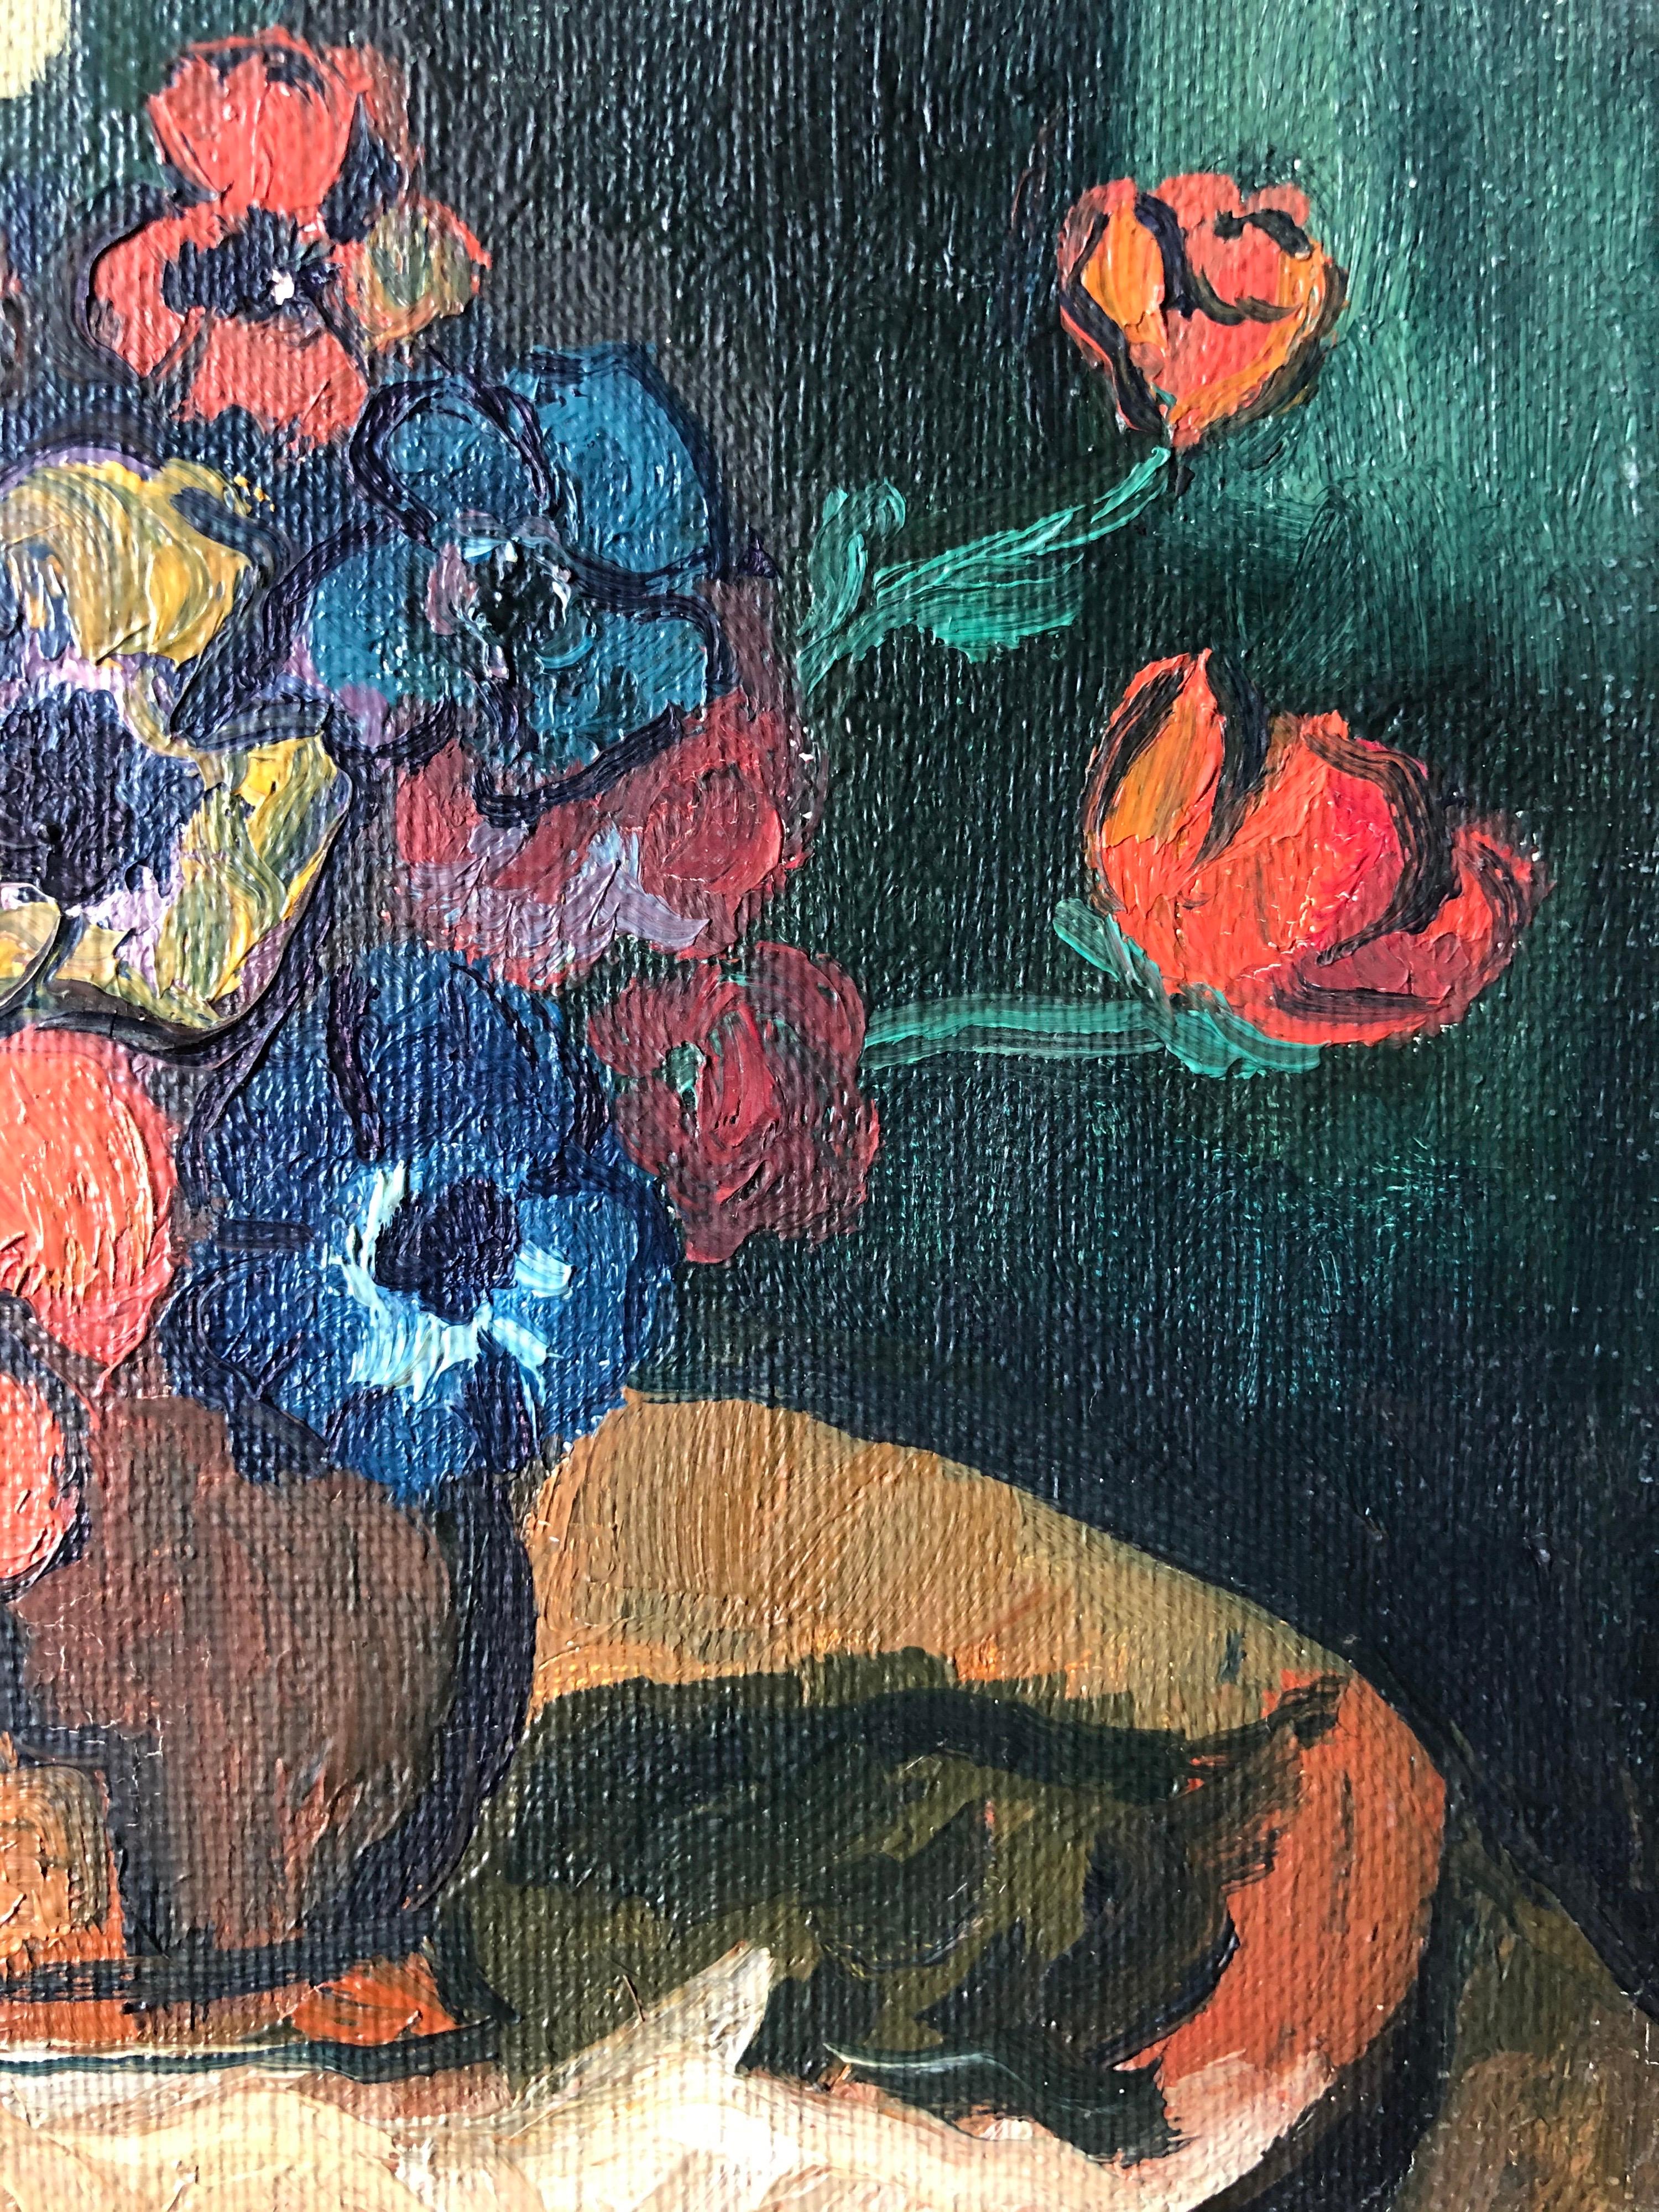 Still Life of Flowers
by Fernand Audet (French, Tarascon 1923 - Mulhouse 2016)
oil painting on canvas, unframed, on stretcher frame

size: 6.25 x 8.5 inches

Beautiful colours depicting this vibrant and alive still life painting. Audet very much